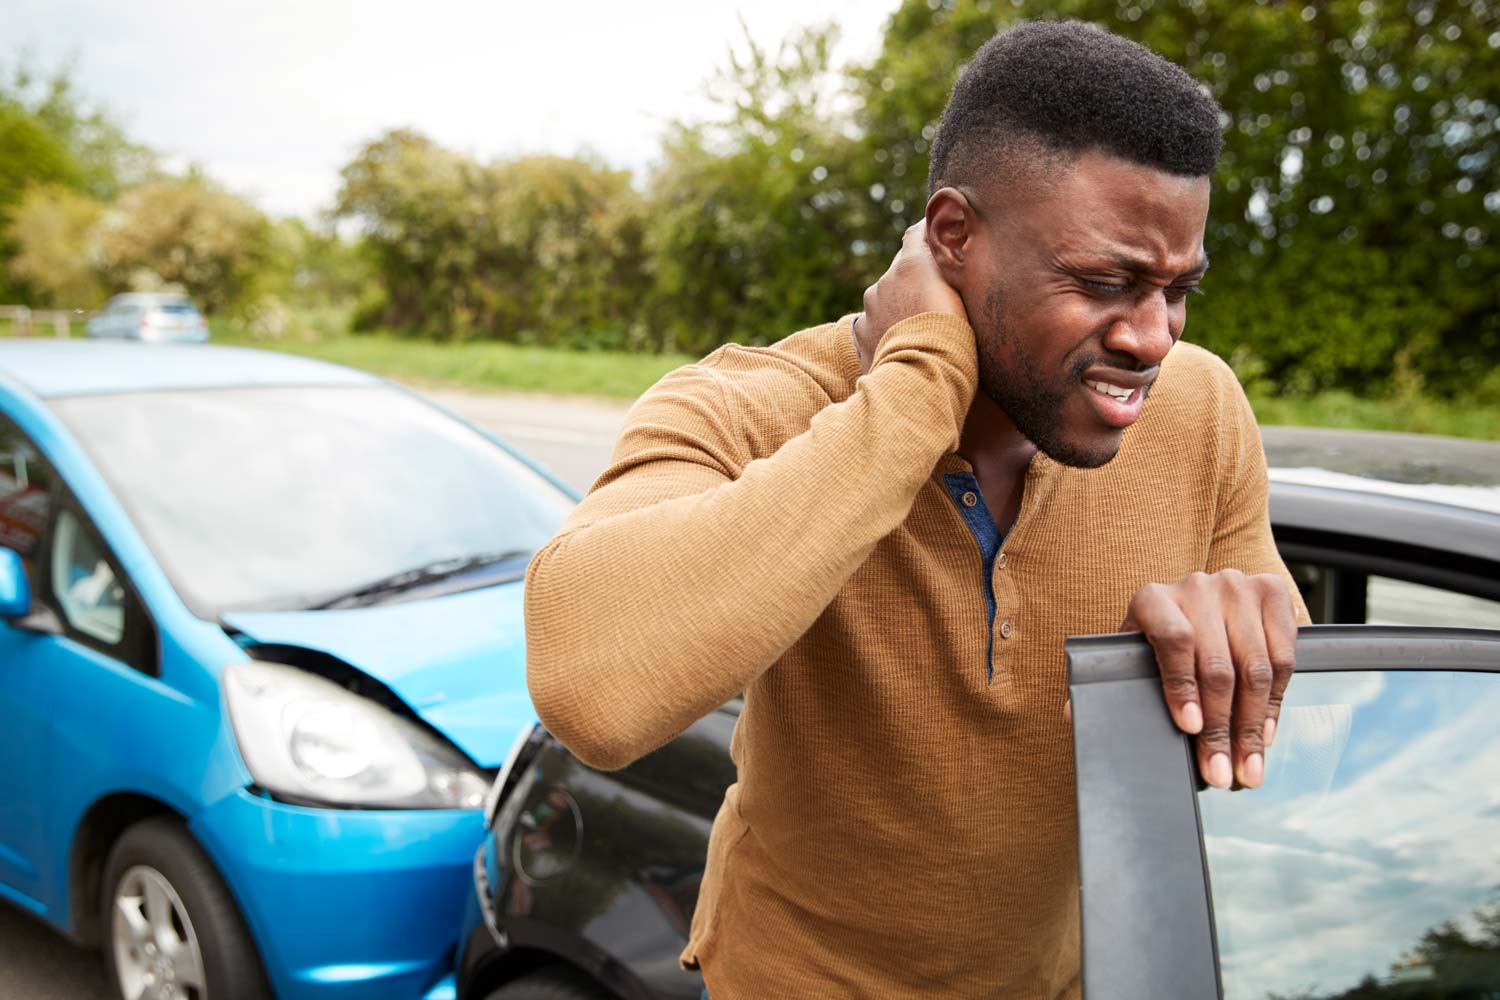 Man holding his neck in pain near his black car after a car accident with a blue car on a road with trees in the background, possibly needing to see a chiropractor for his back pain.